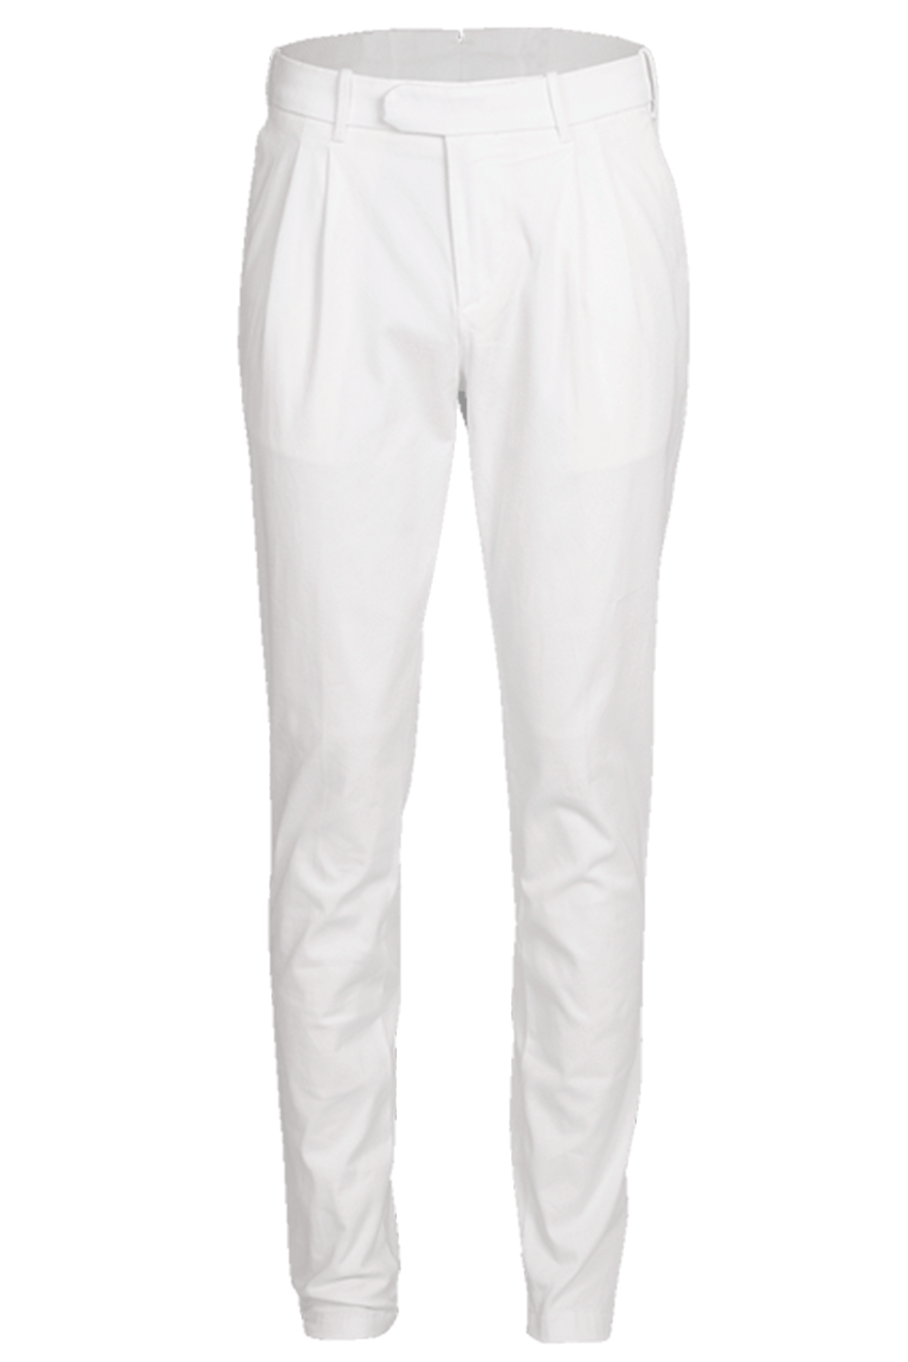 Cotton Twill Stretch Pant – Marissa Collections